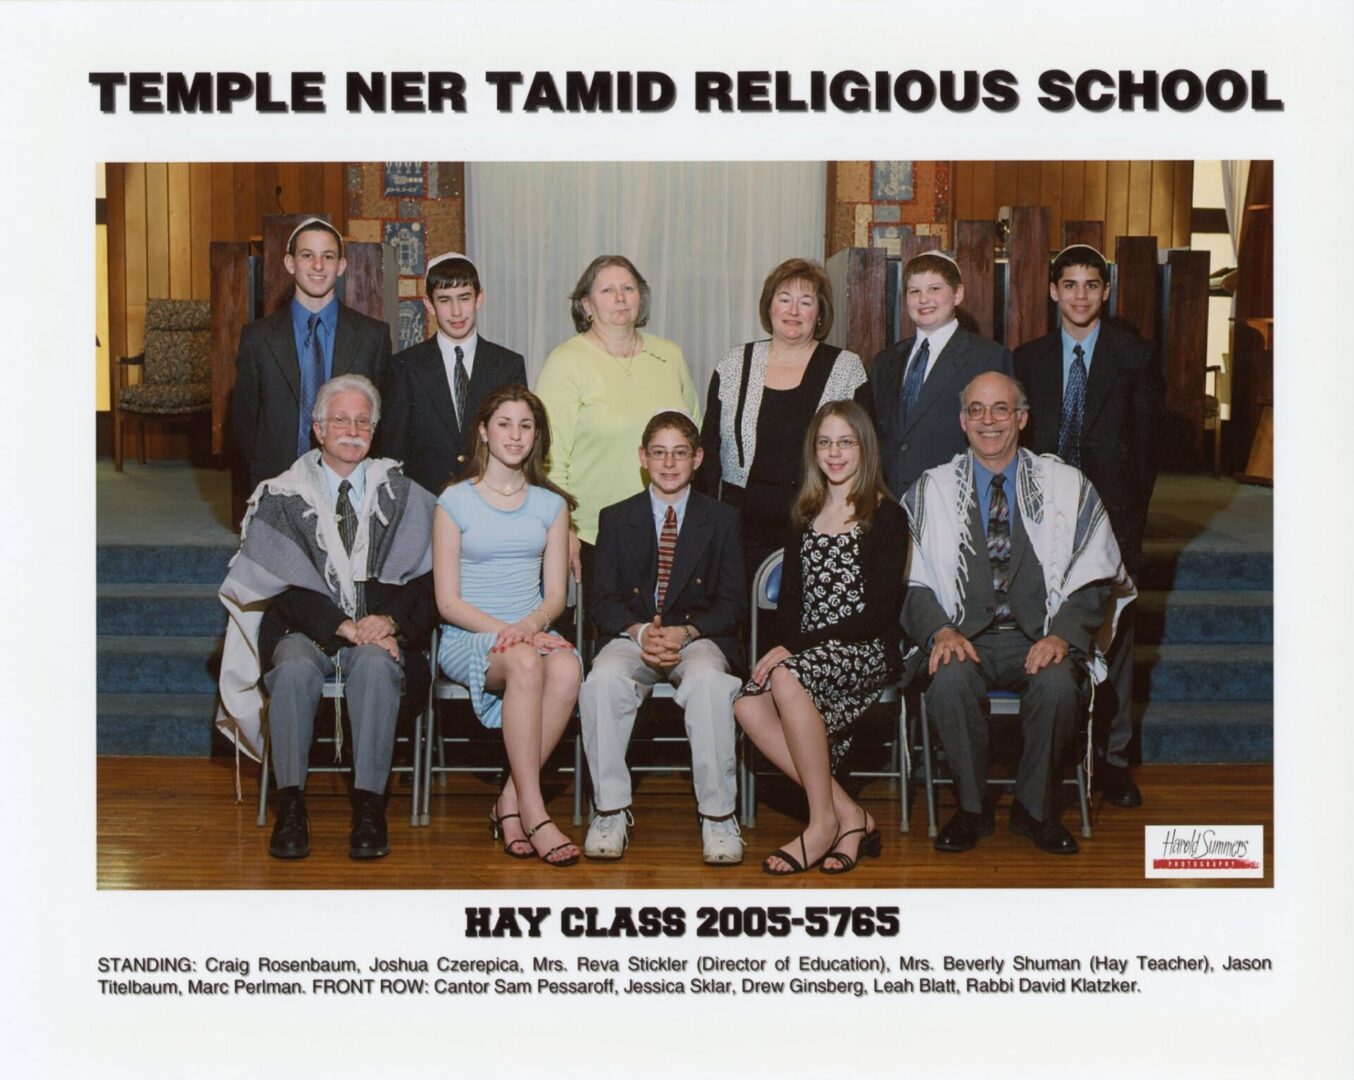 Temple Ner Tamid of the North Shore